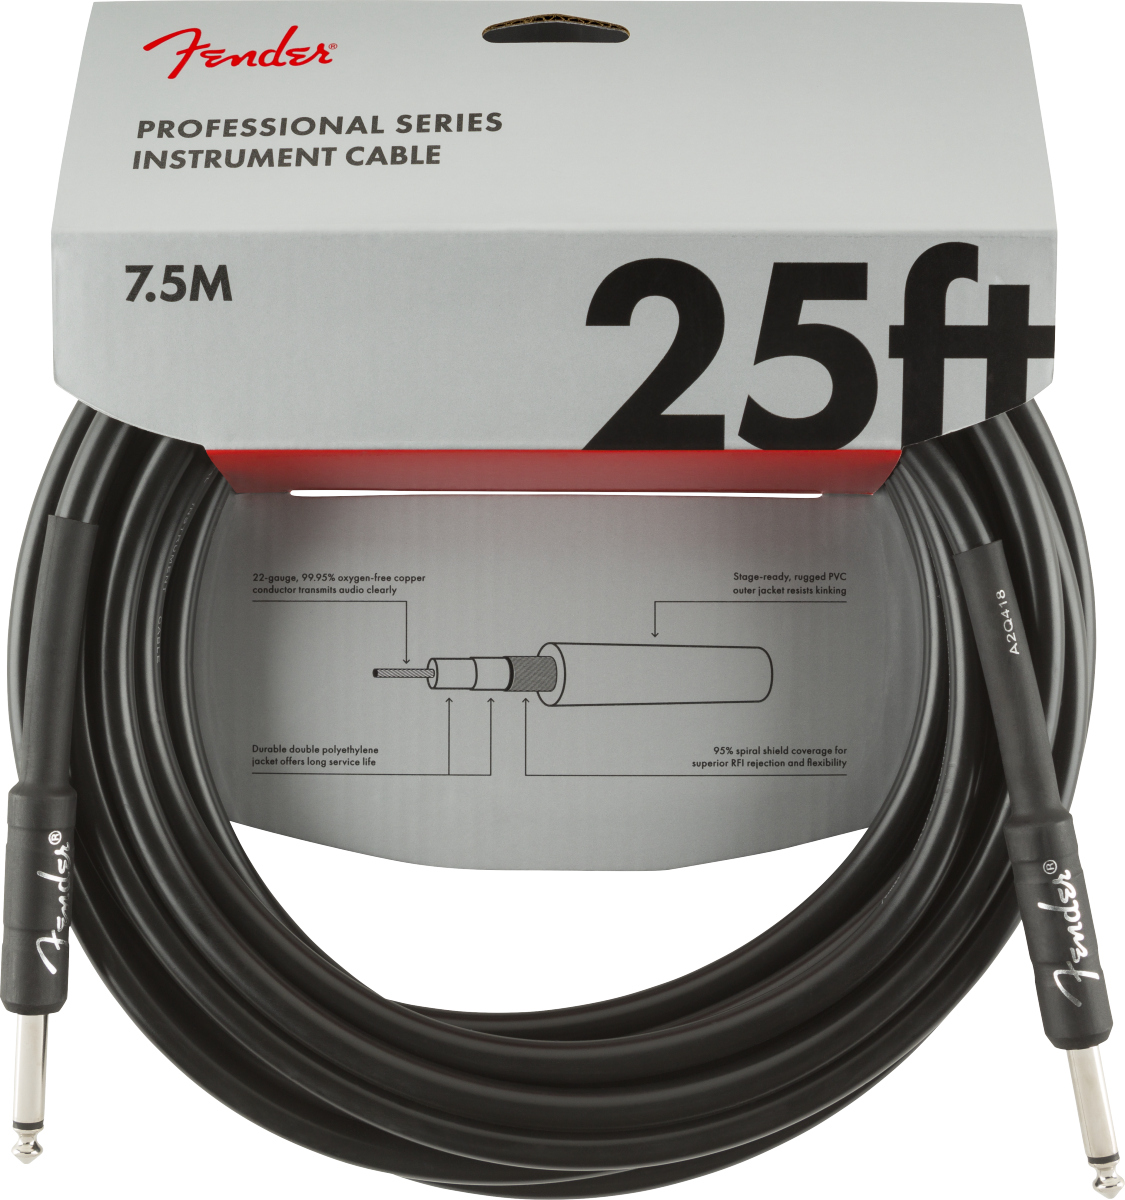 Fender Professional Series 25ft Cable - Straight/Straight Black (25 feet/7.5 meters)